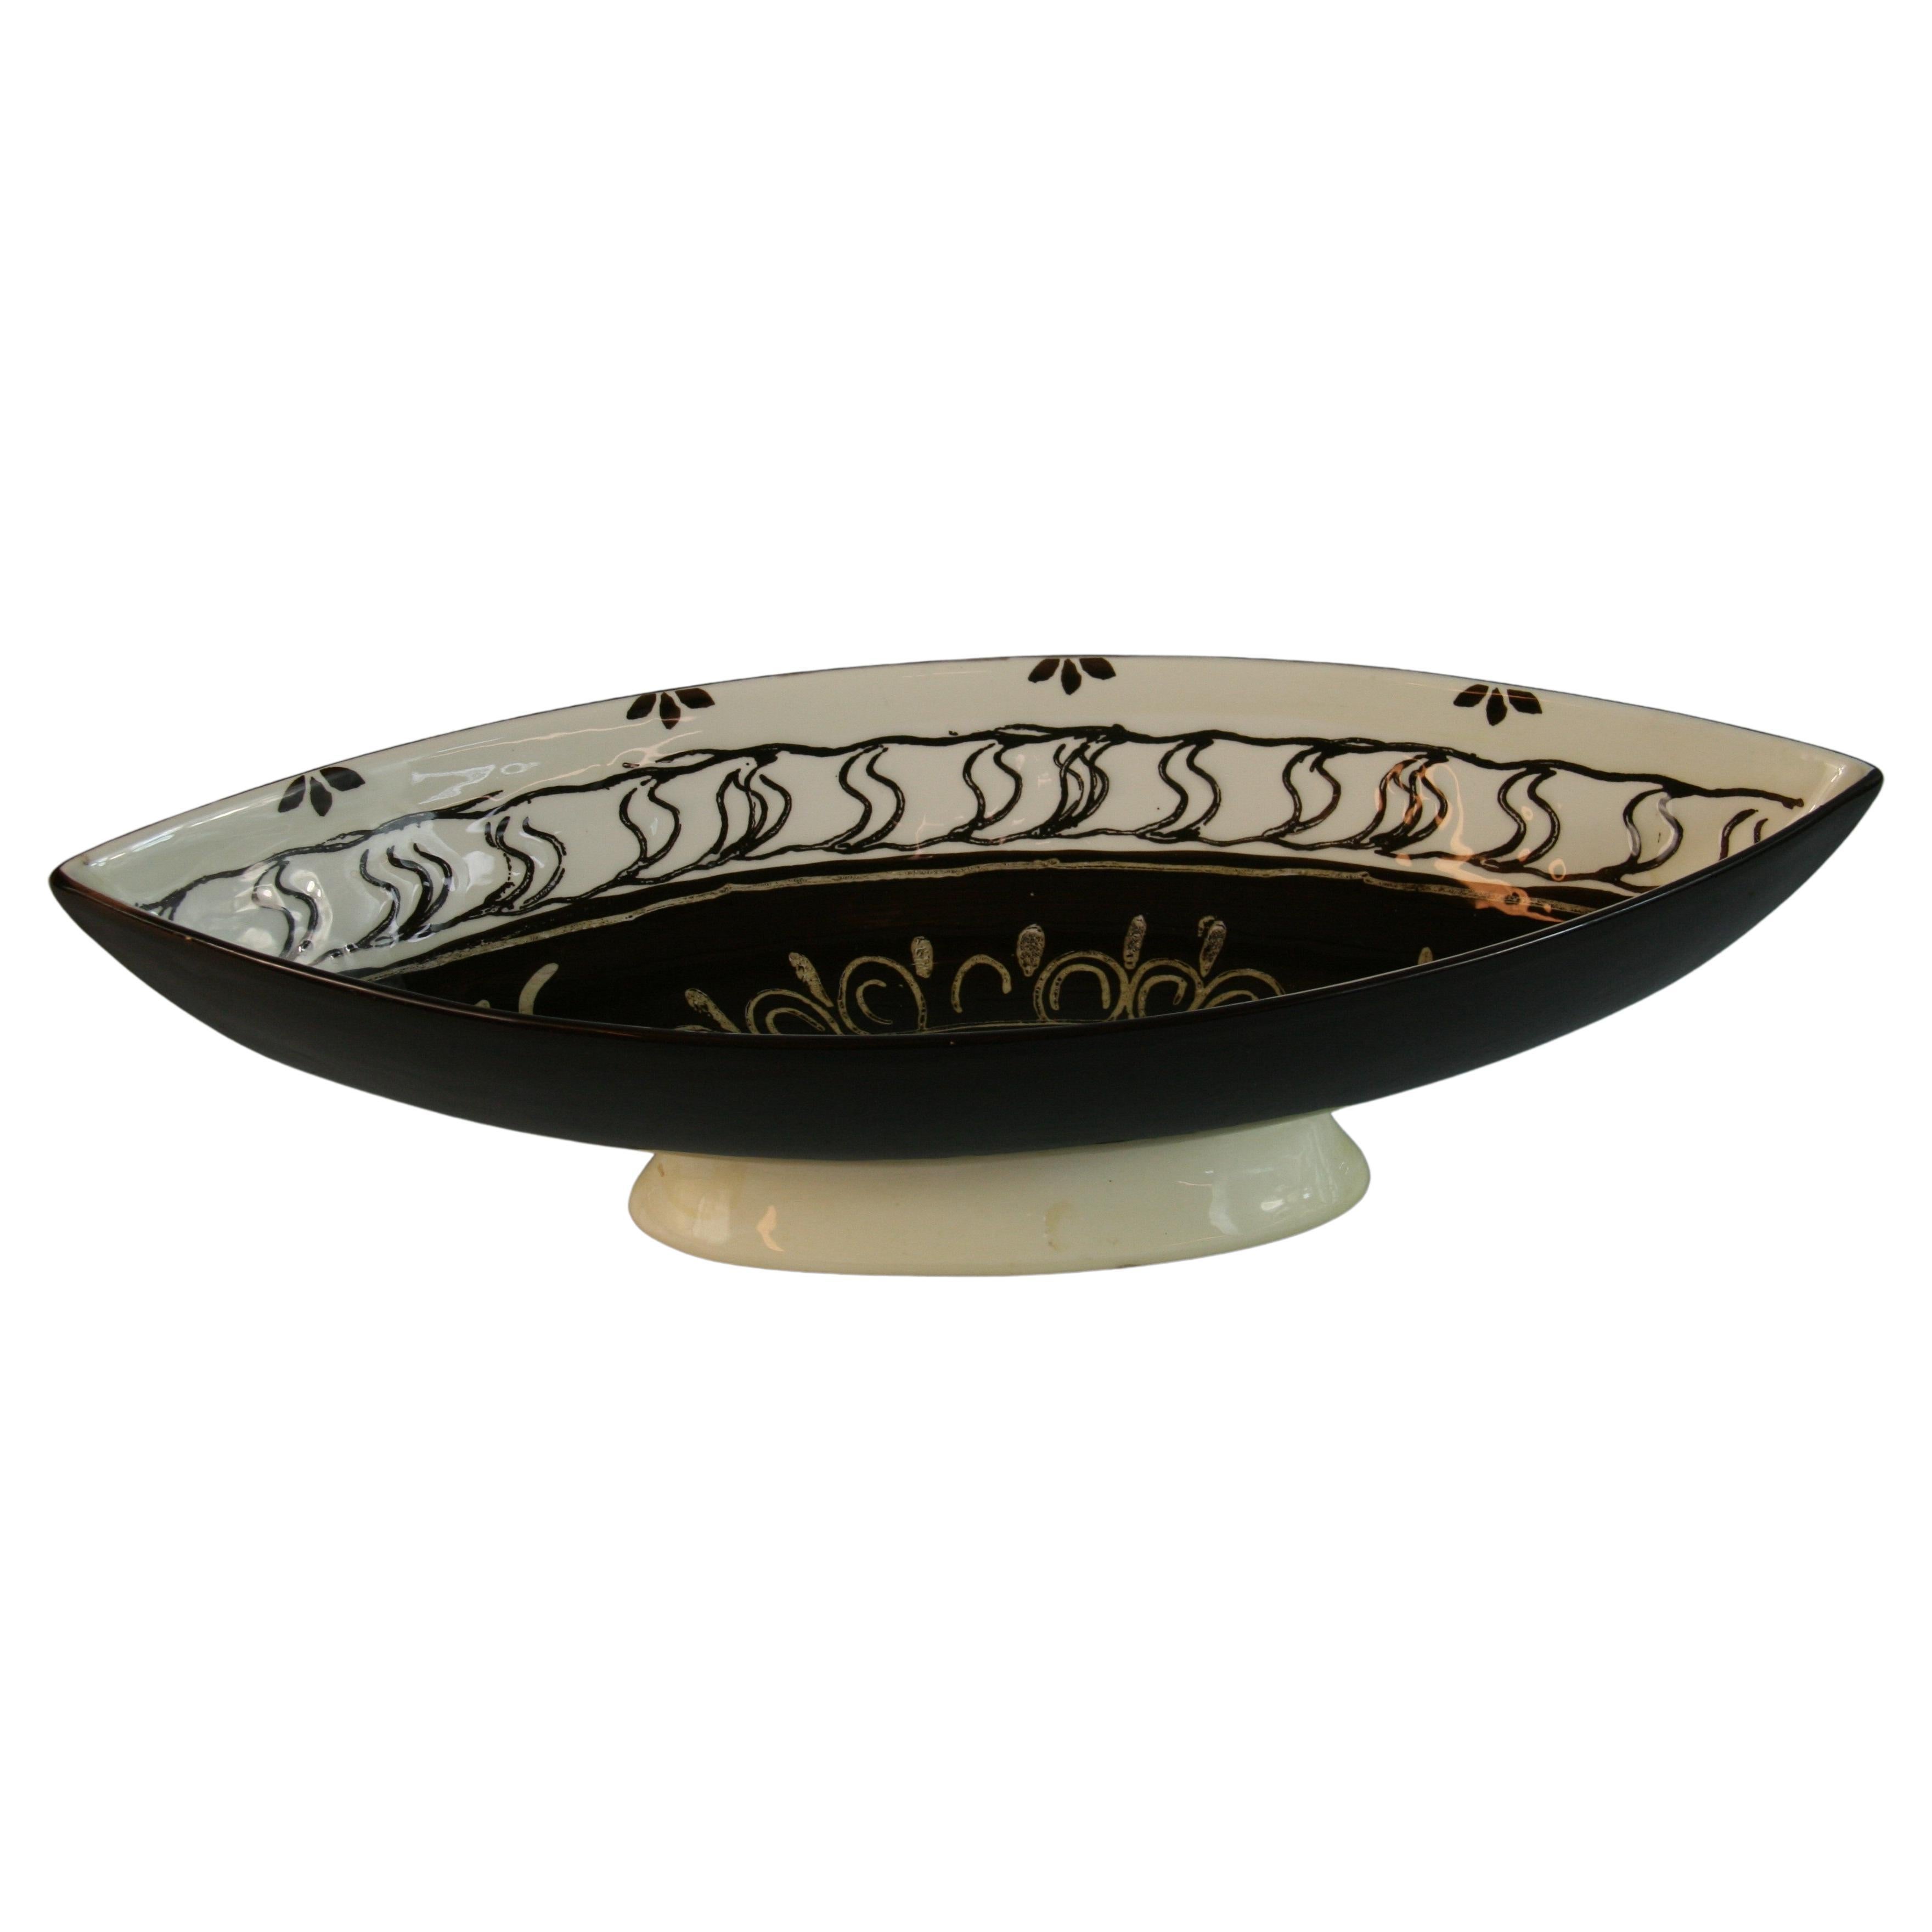 Italian Hand Decorated Boat Shaped Centerpiece by Antica Fornace